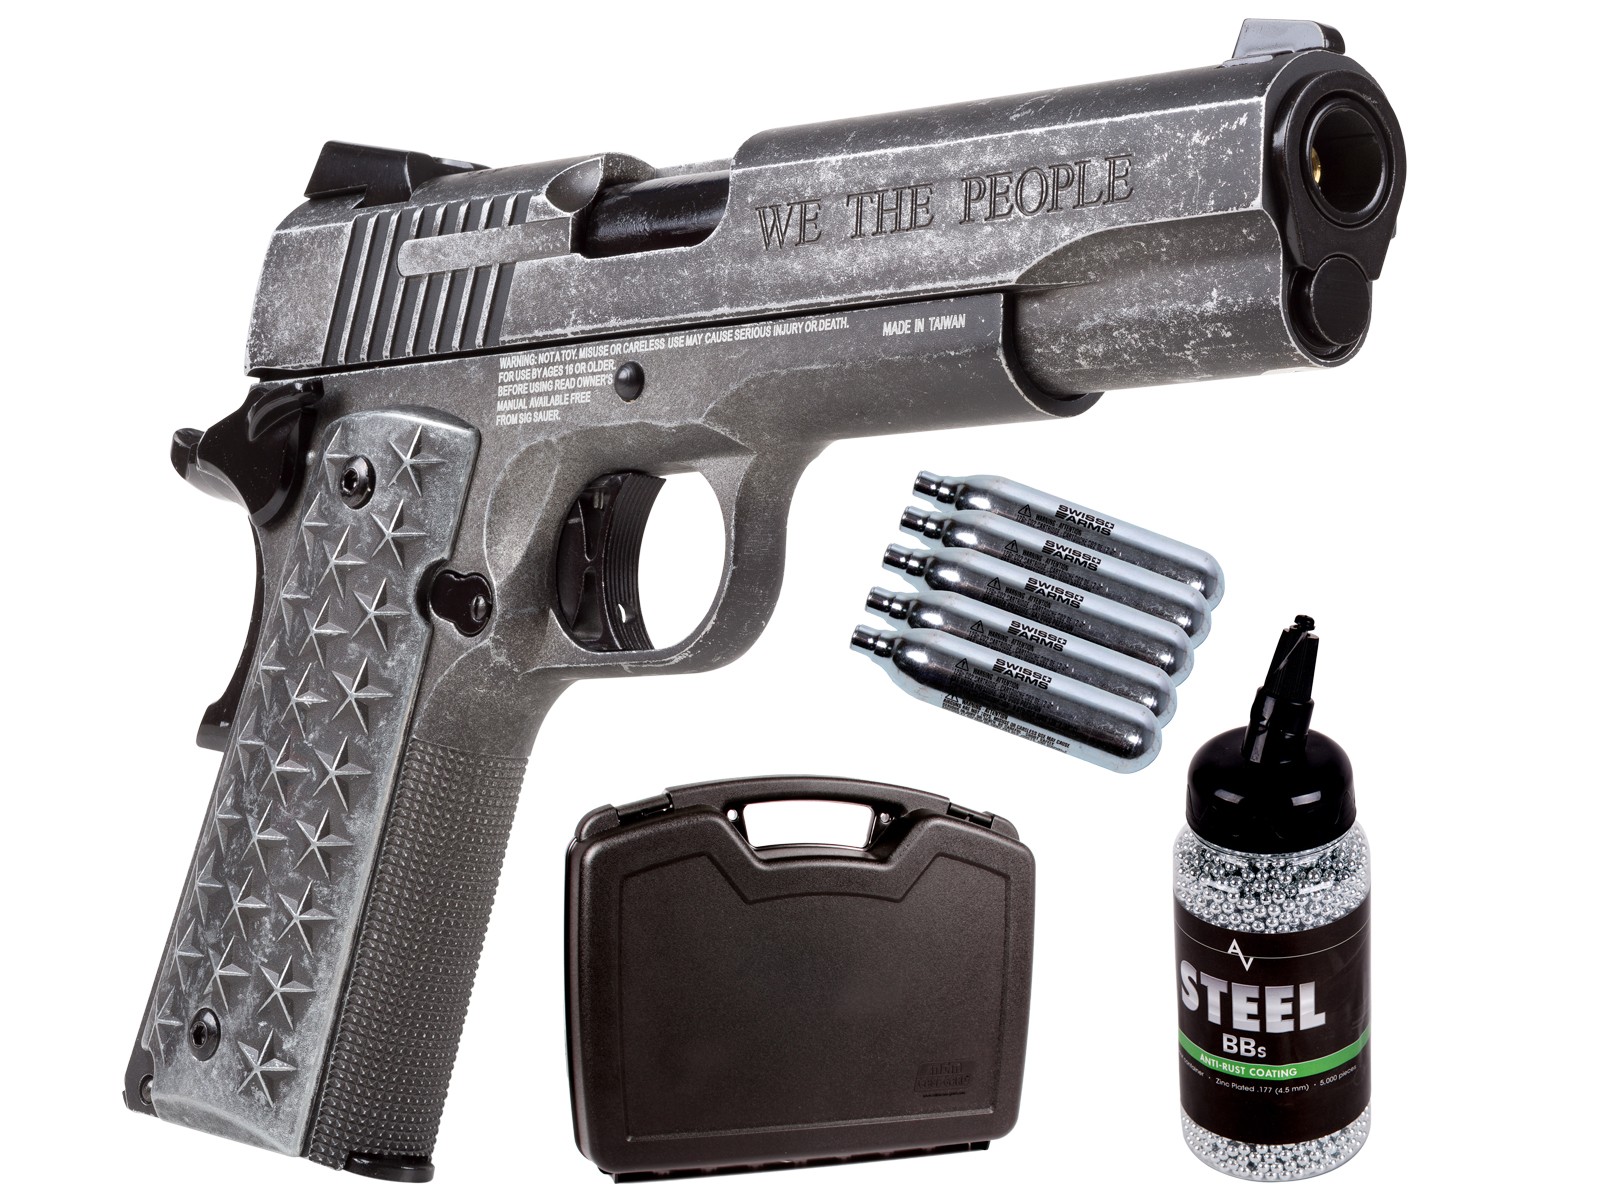 SIG Sauer 1911 We The People CO2 BB Pistol Case Kit